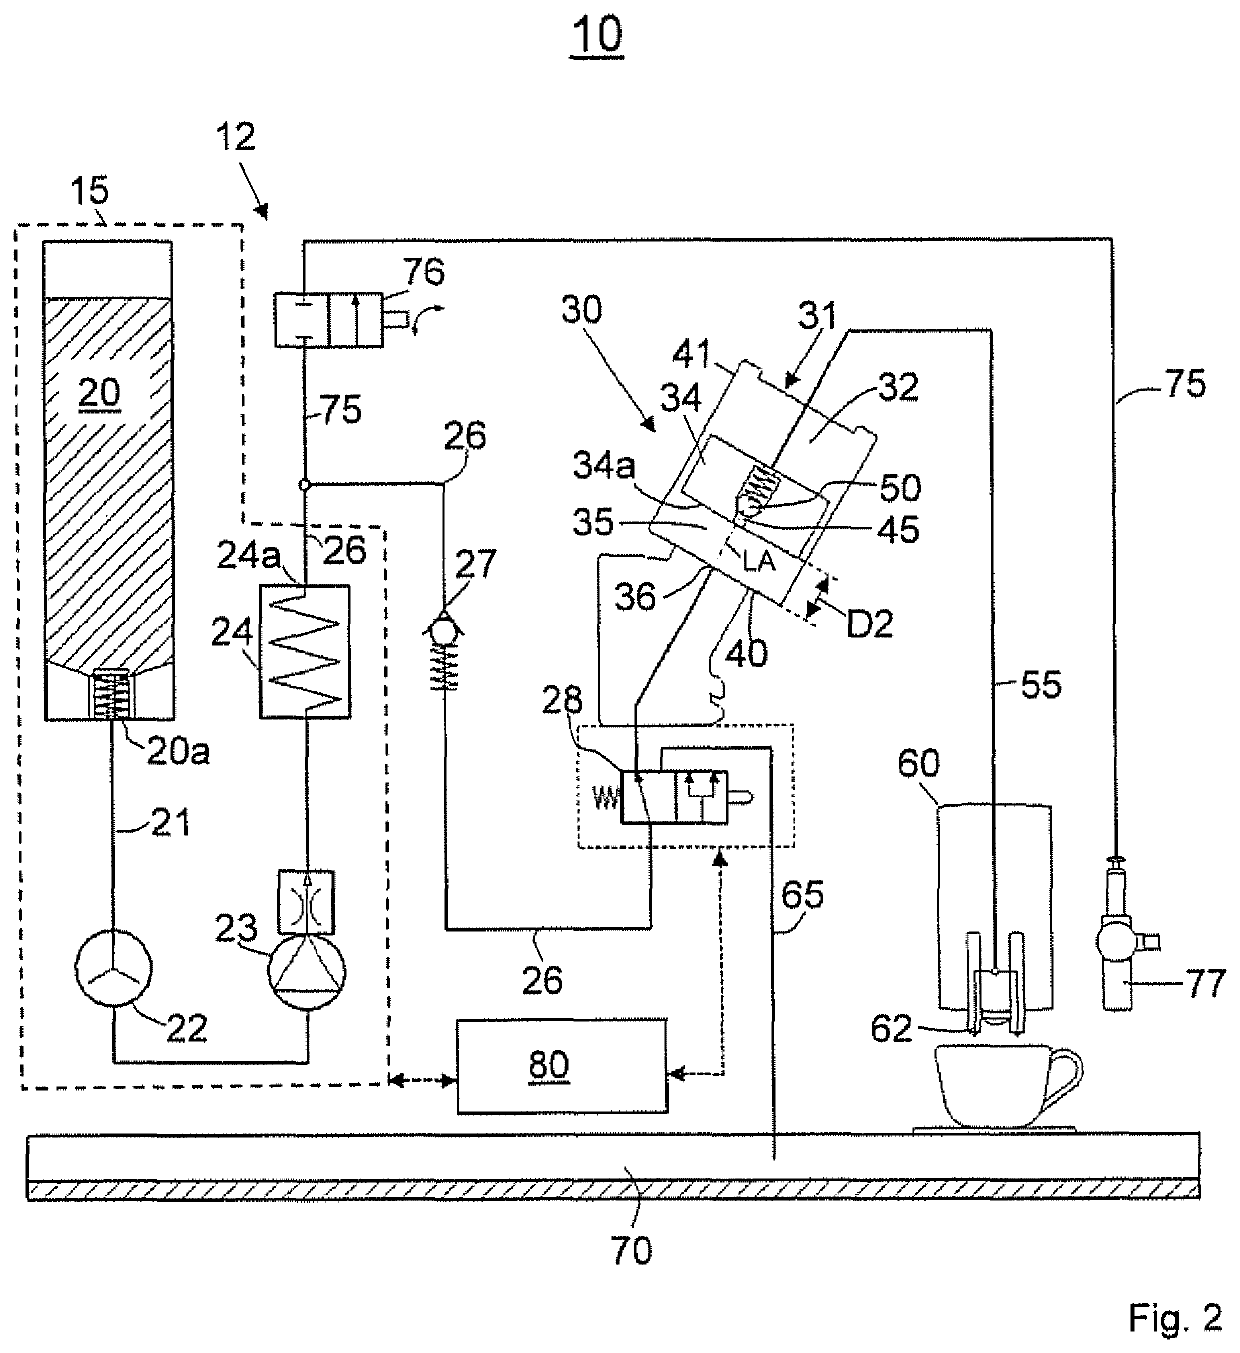 Method for producing a coffee beverage in a coffee machine